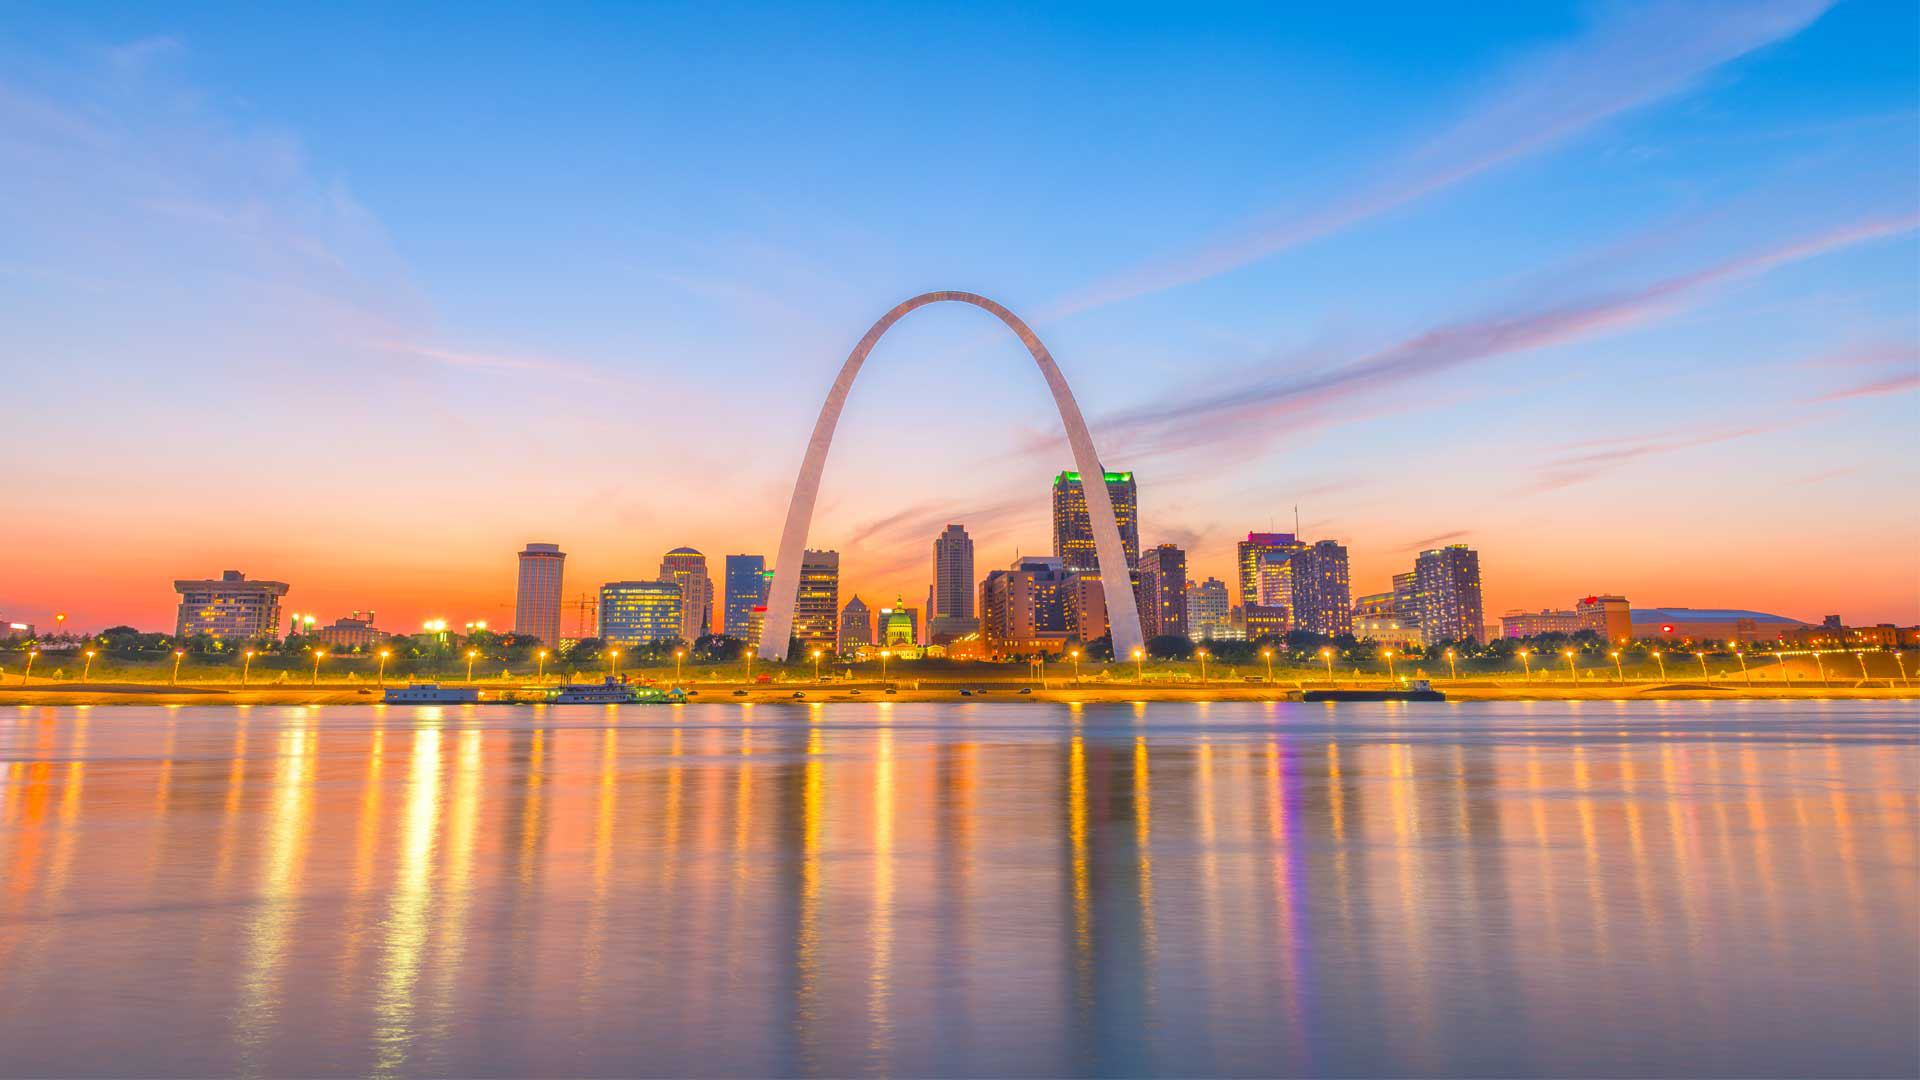 ST. LOUIS ADDS 2021 USA RACQUETBALL NATIONAL CHAMPIONSHIPS FESTIVAL TO ITS JUNE EVENT LINEUP